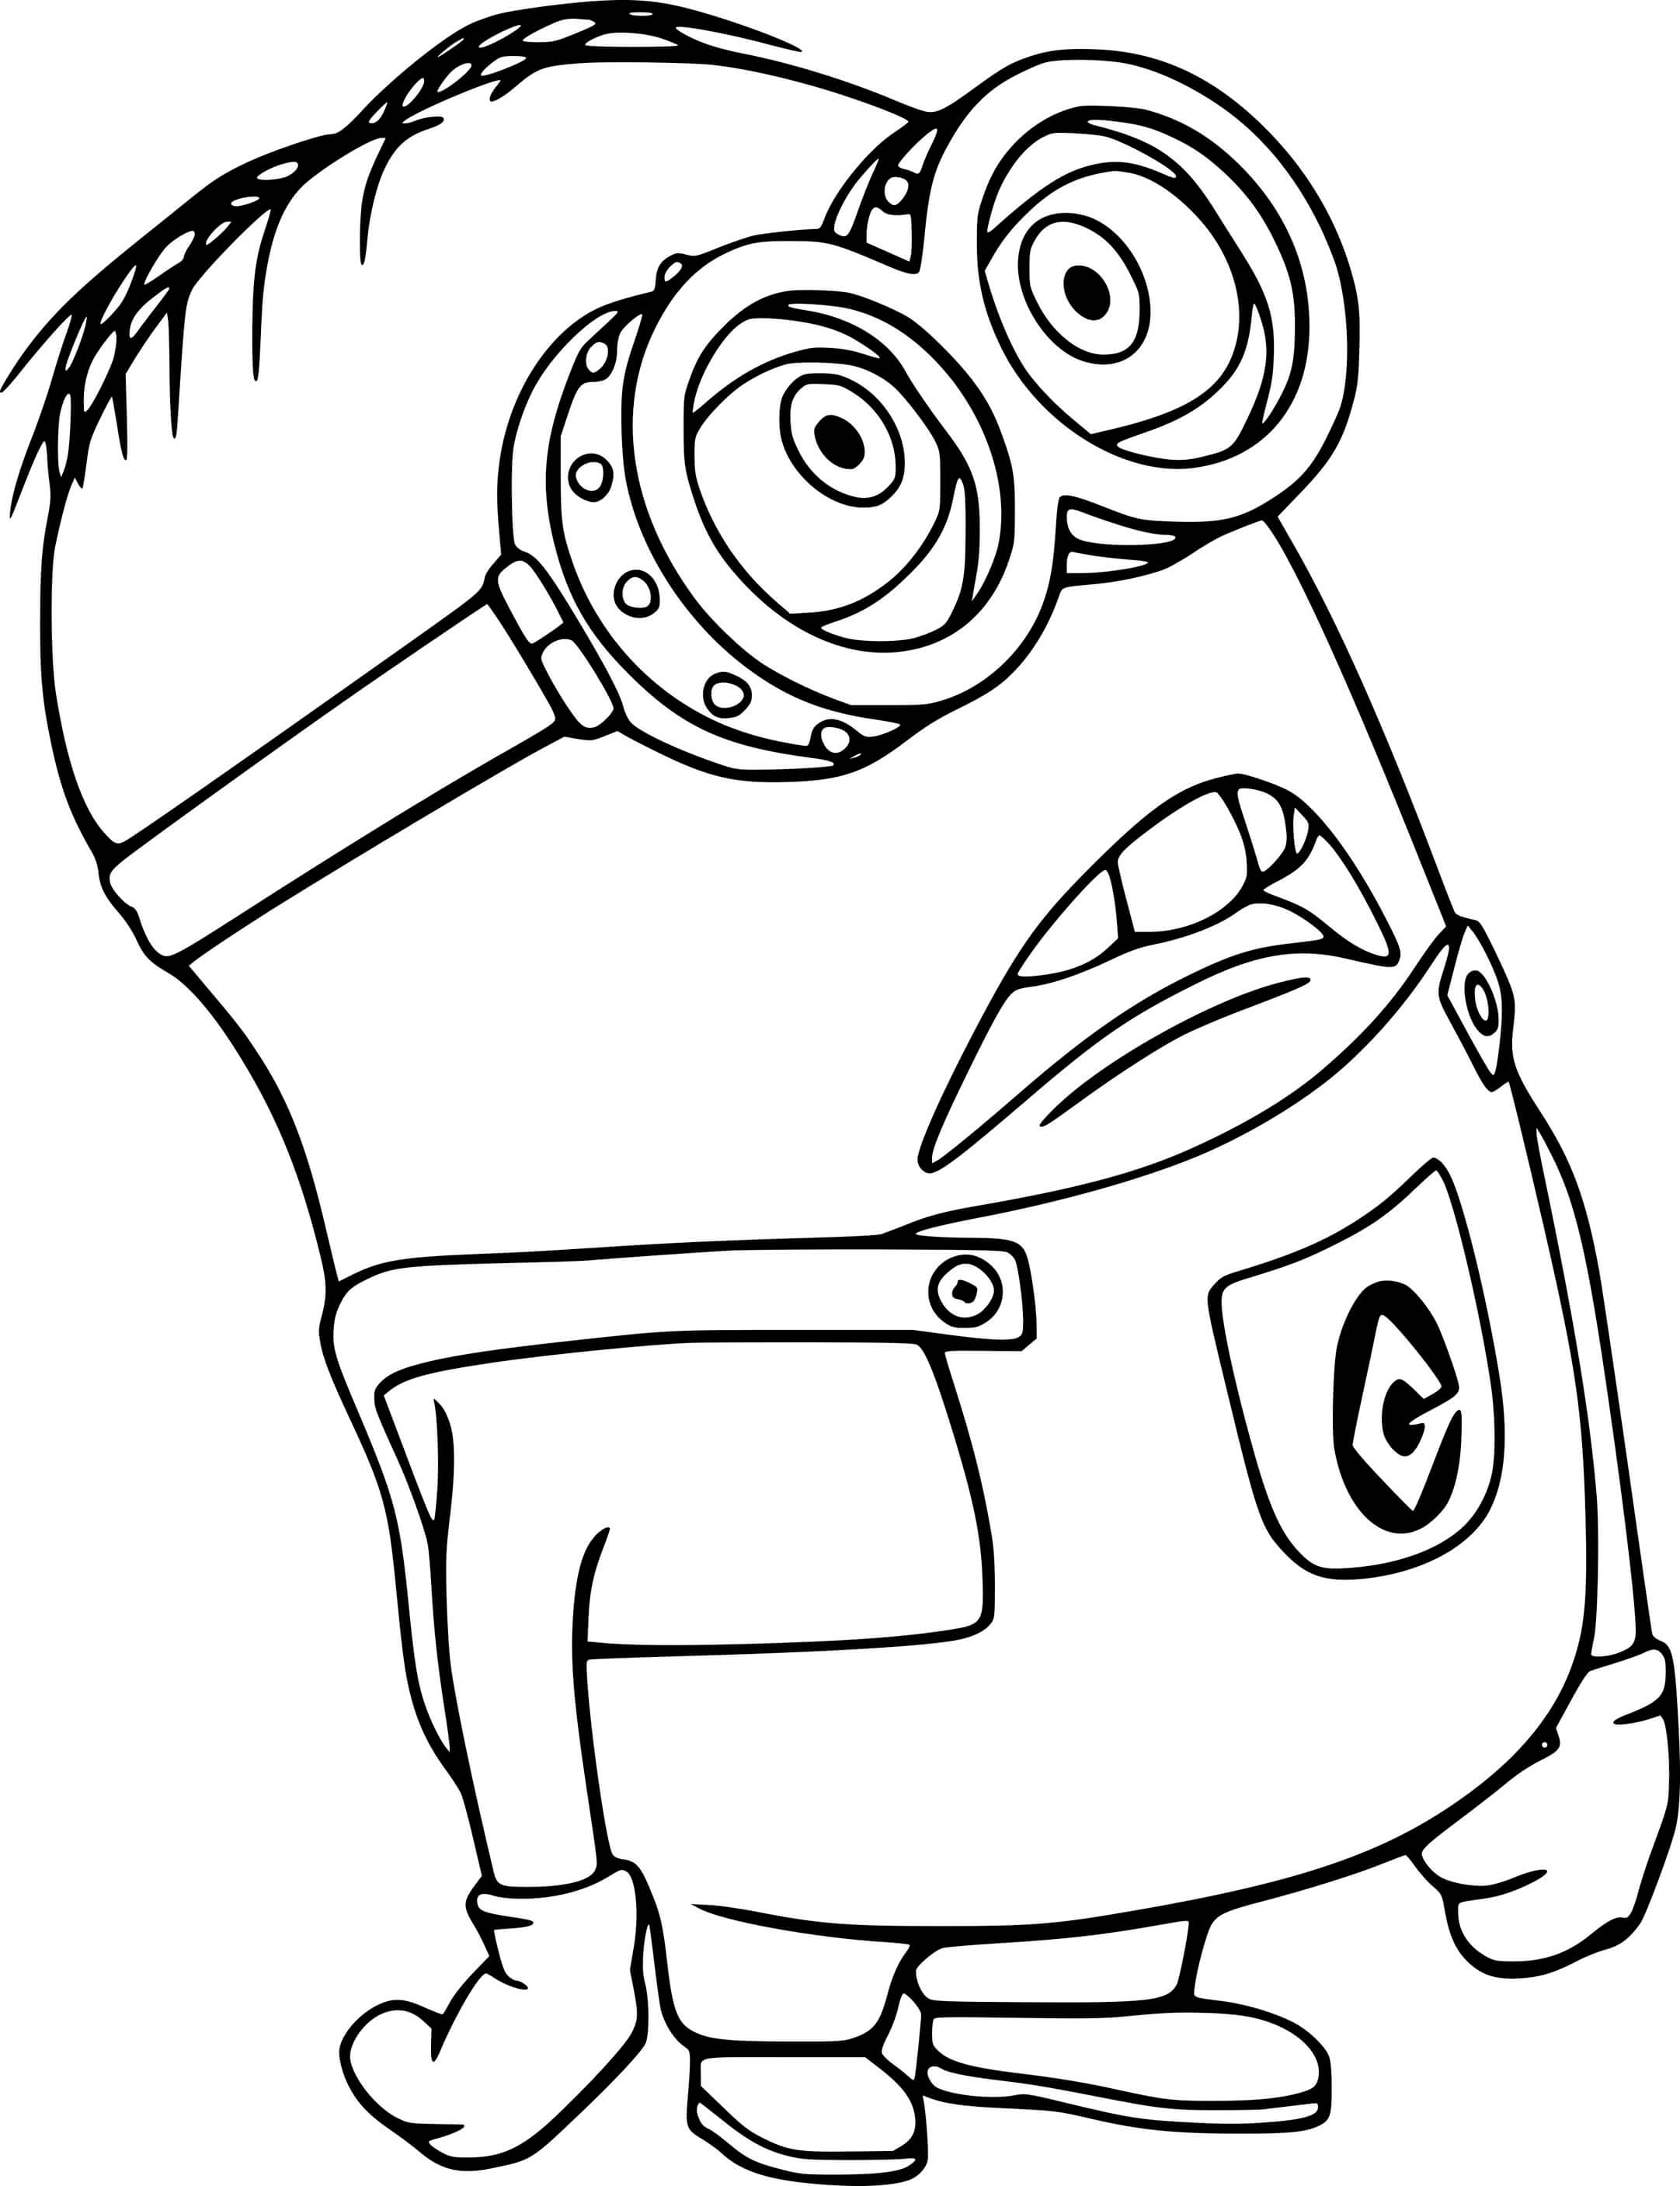 Minion Is Surprised Coloring Page